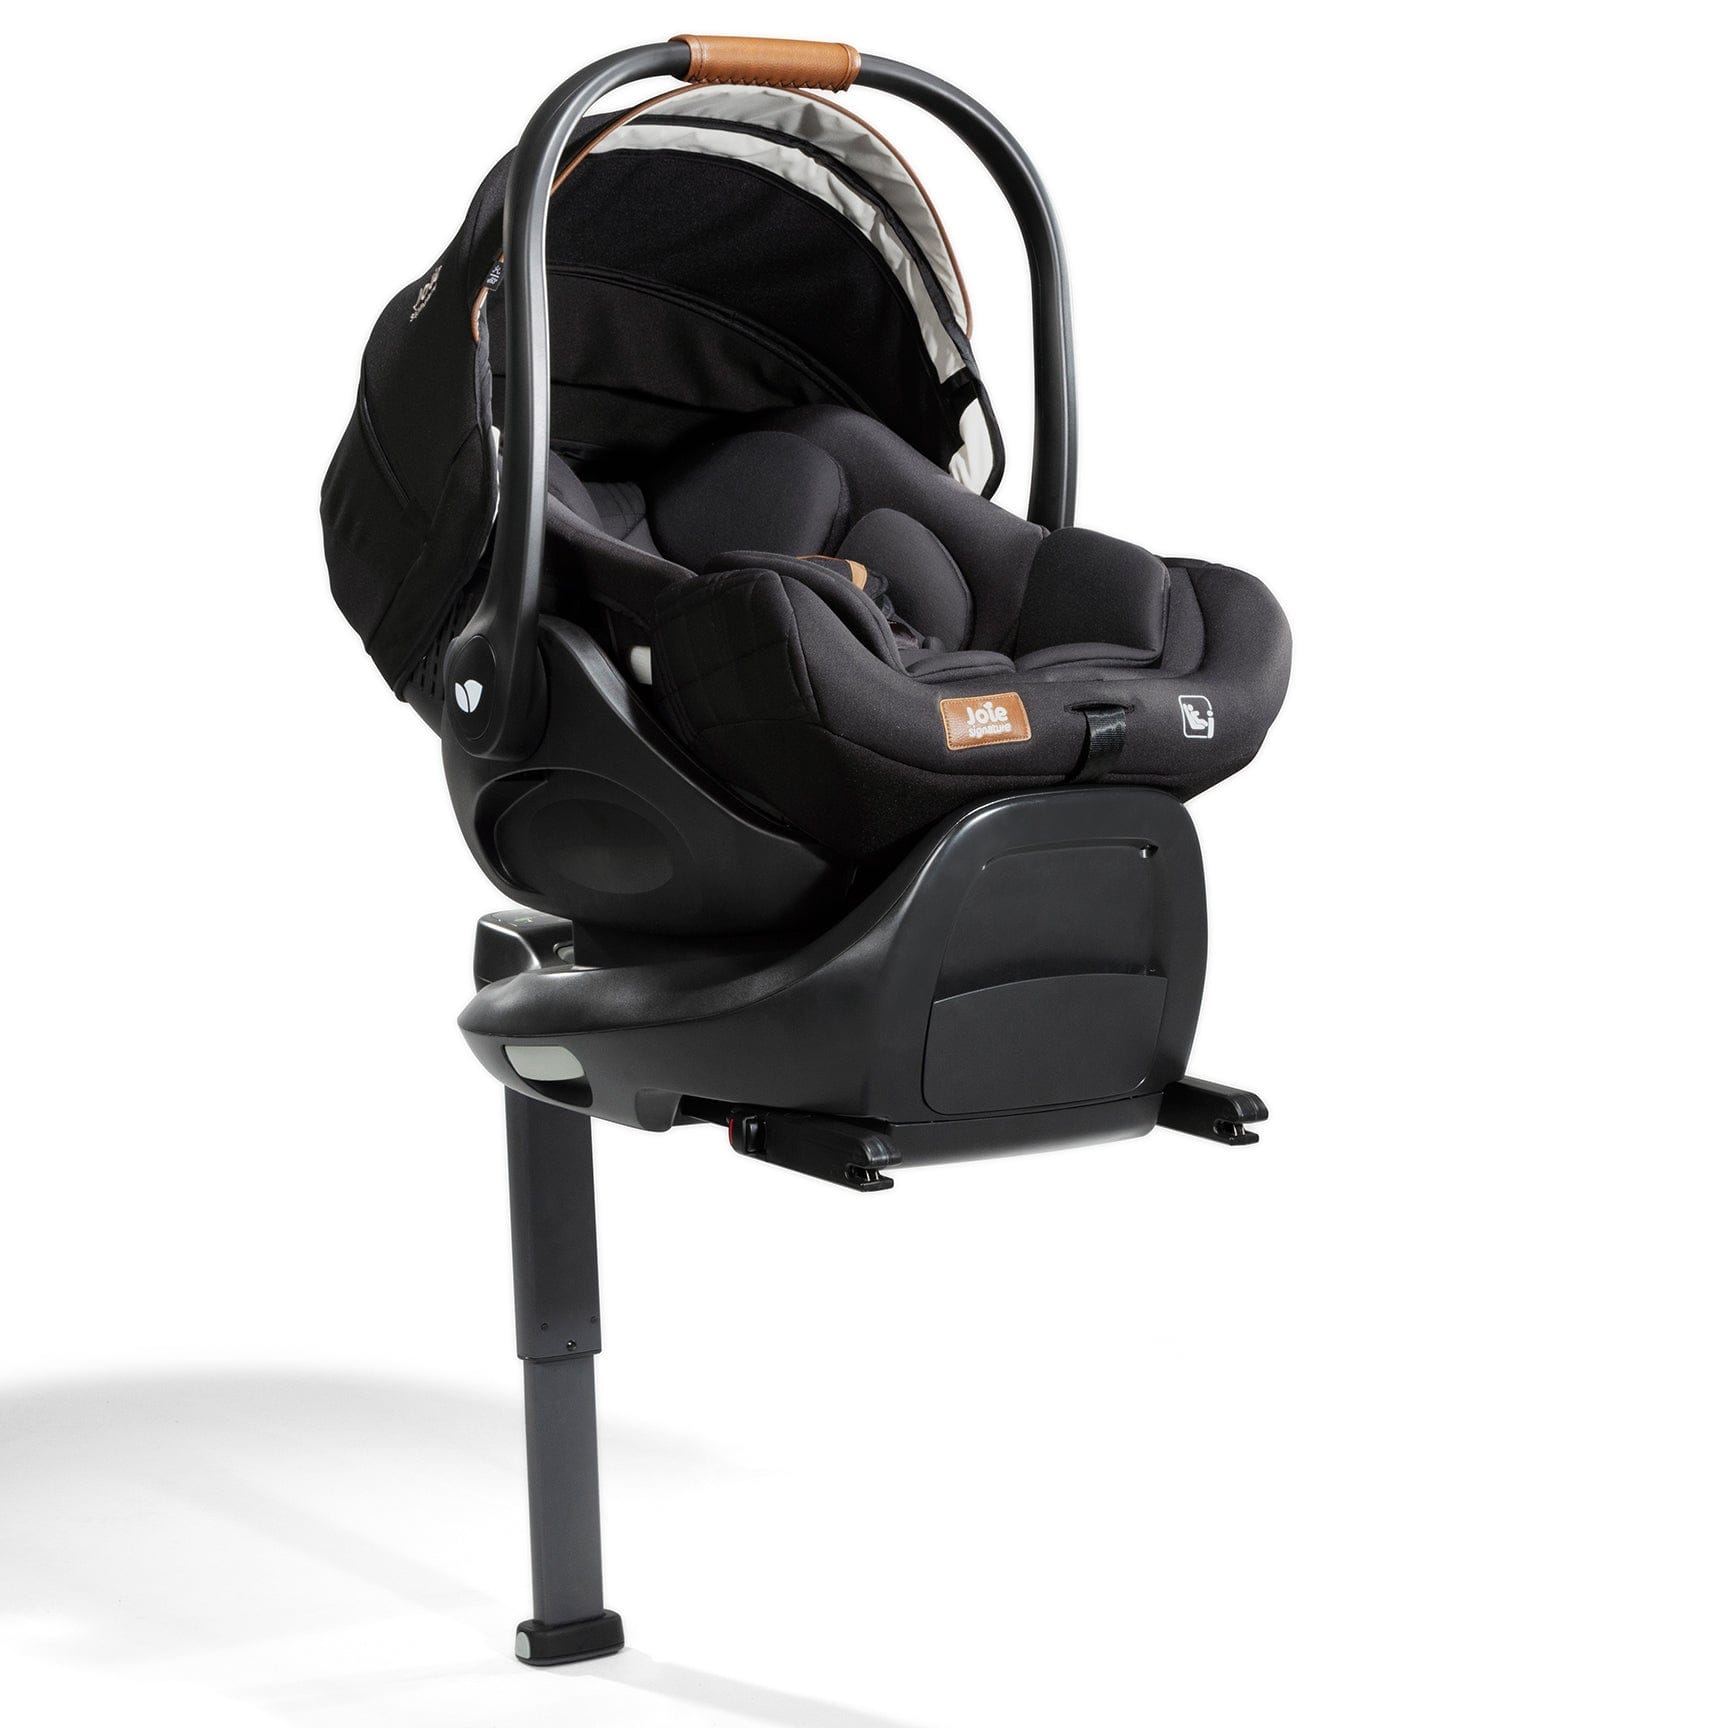 Joie i-Level Recline Signature Car Seat & i-Base Encore in Eclipse Baby Car Seats 12224-ECL